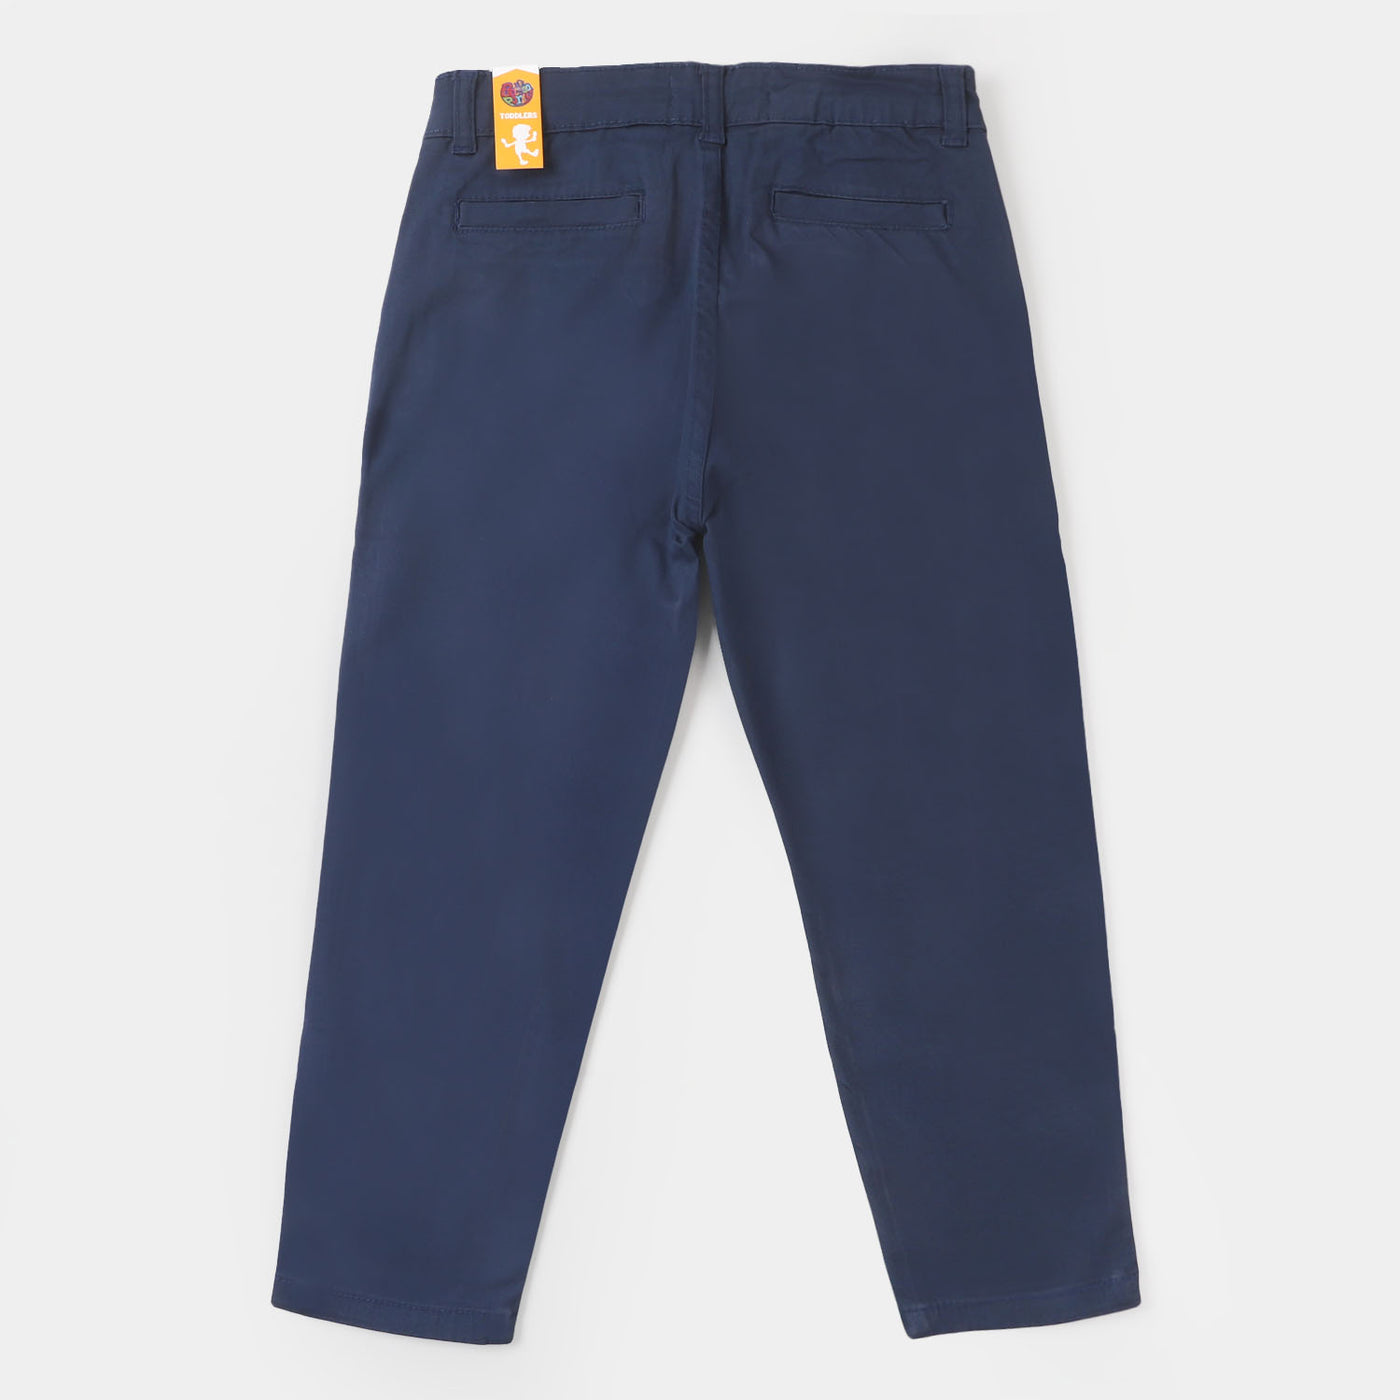 Boys Cotton Pant Solid - Teal blue